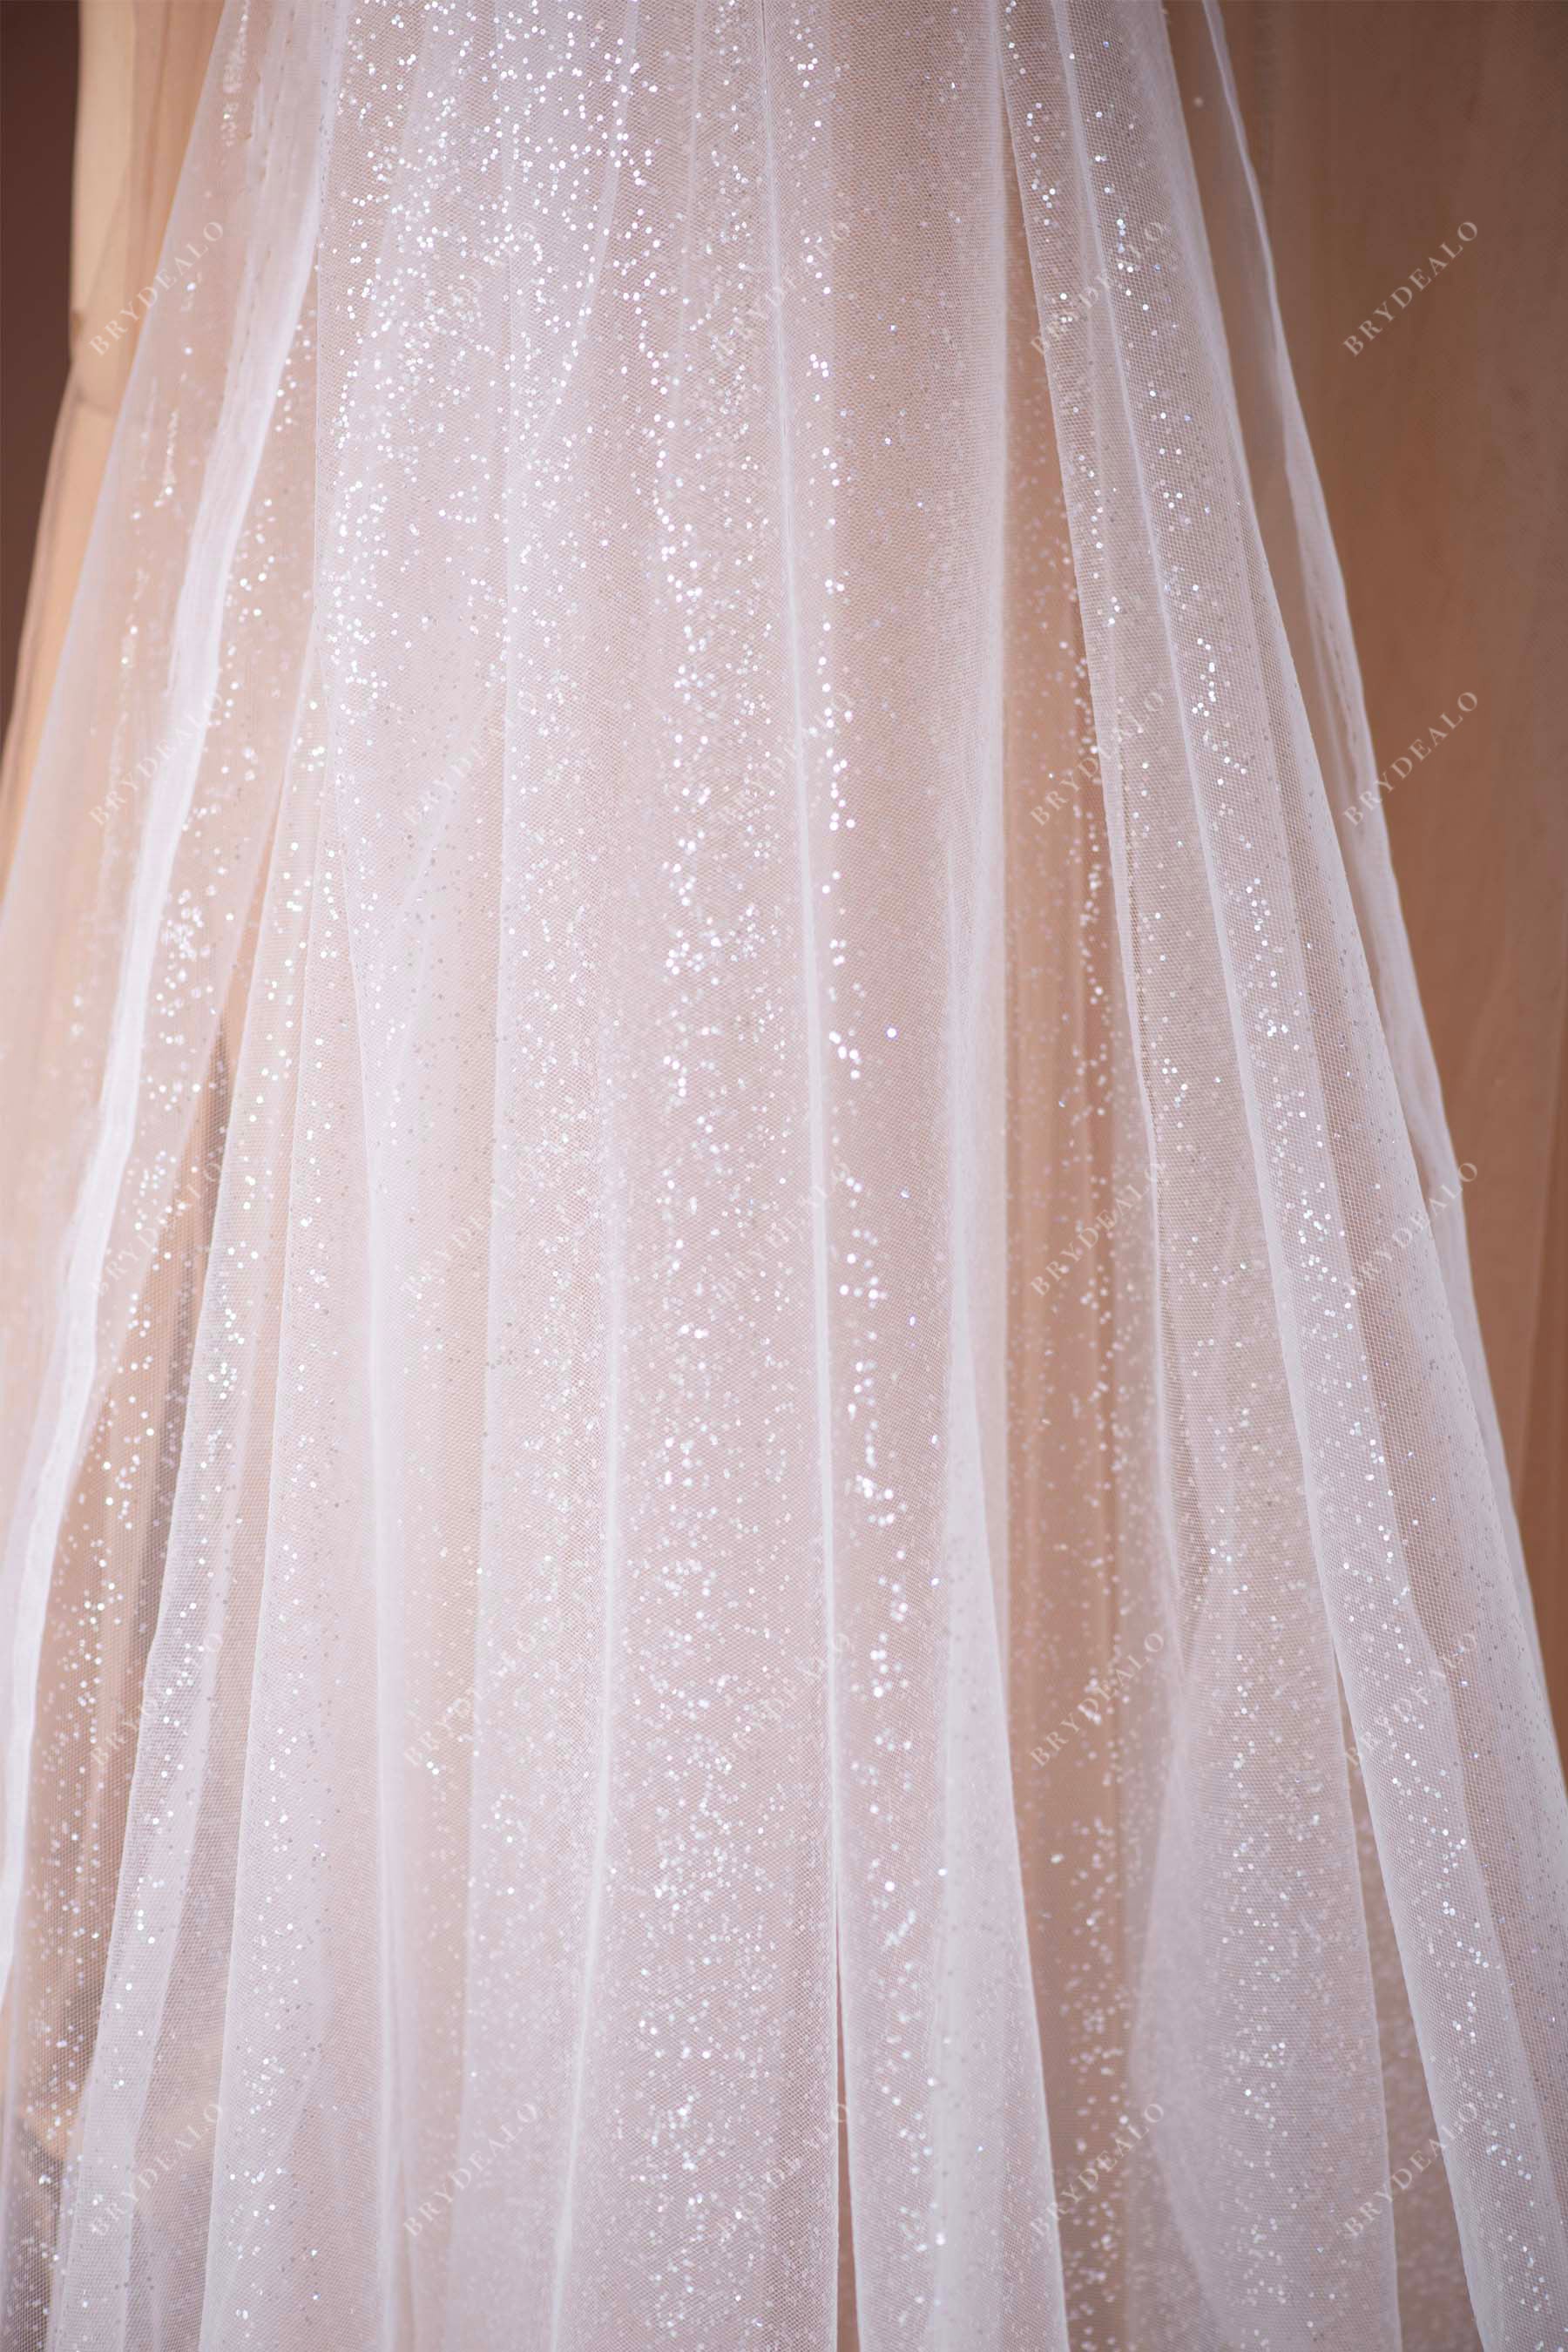 shimmery glitter tulle fabric